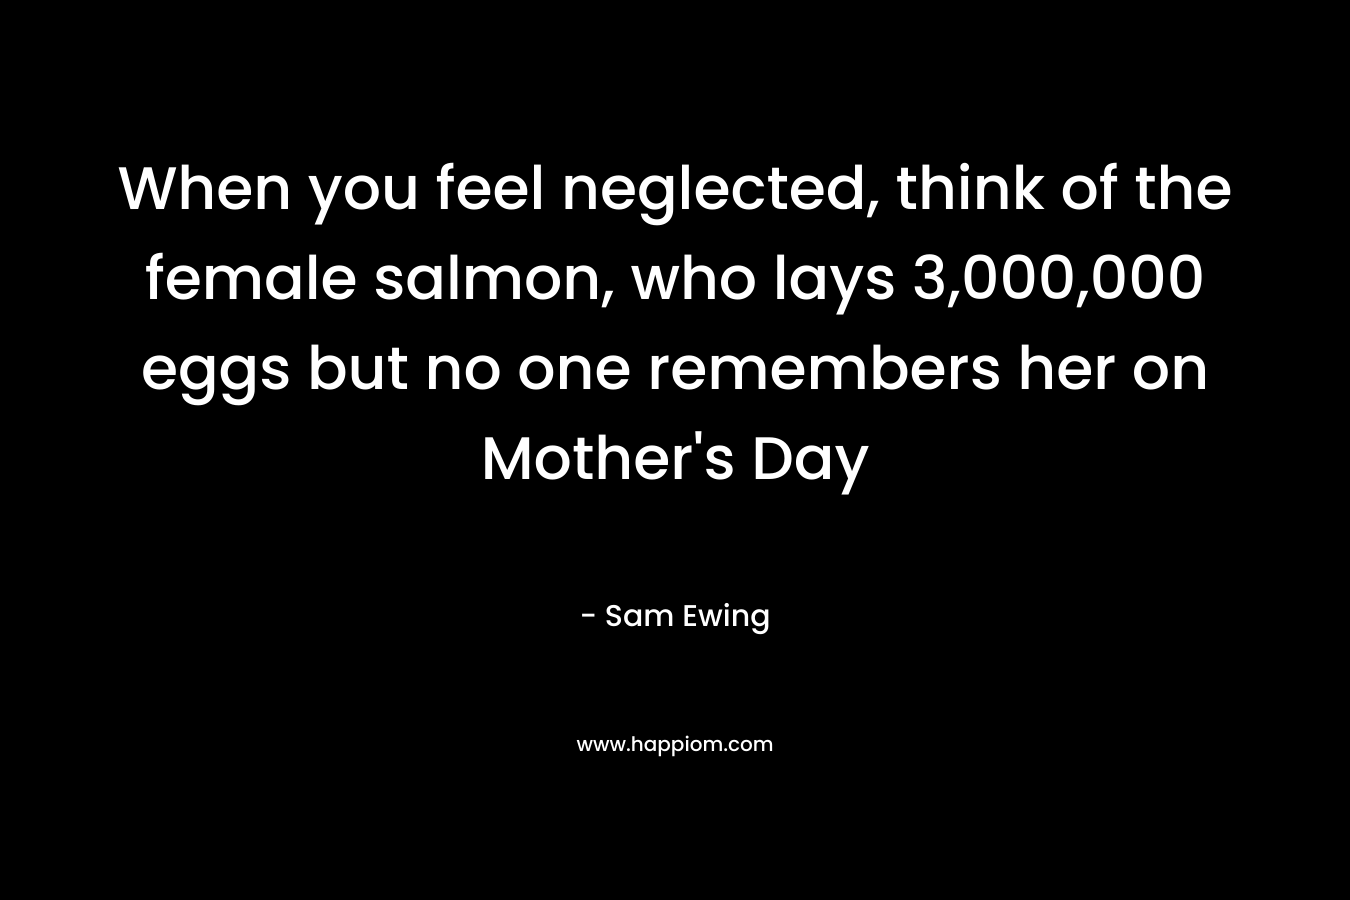 When you feel neglected, think of the female salmon, who lays 3,000,000 eggs but no one remembers her on Mother’s Day – Sam Ewing